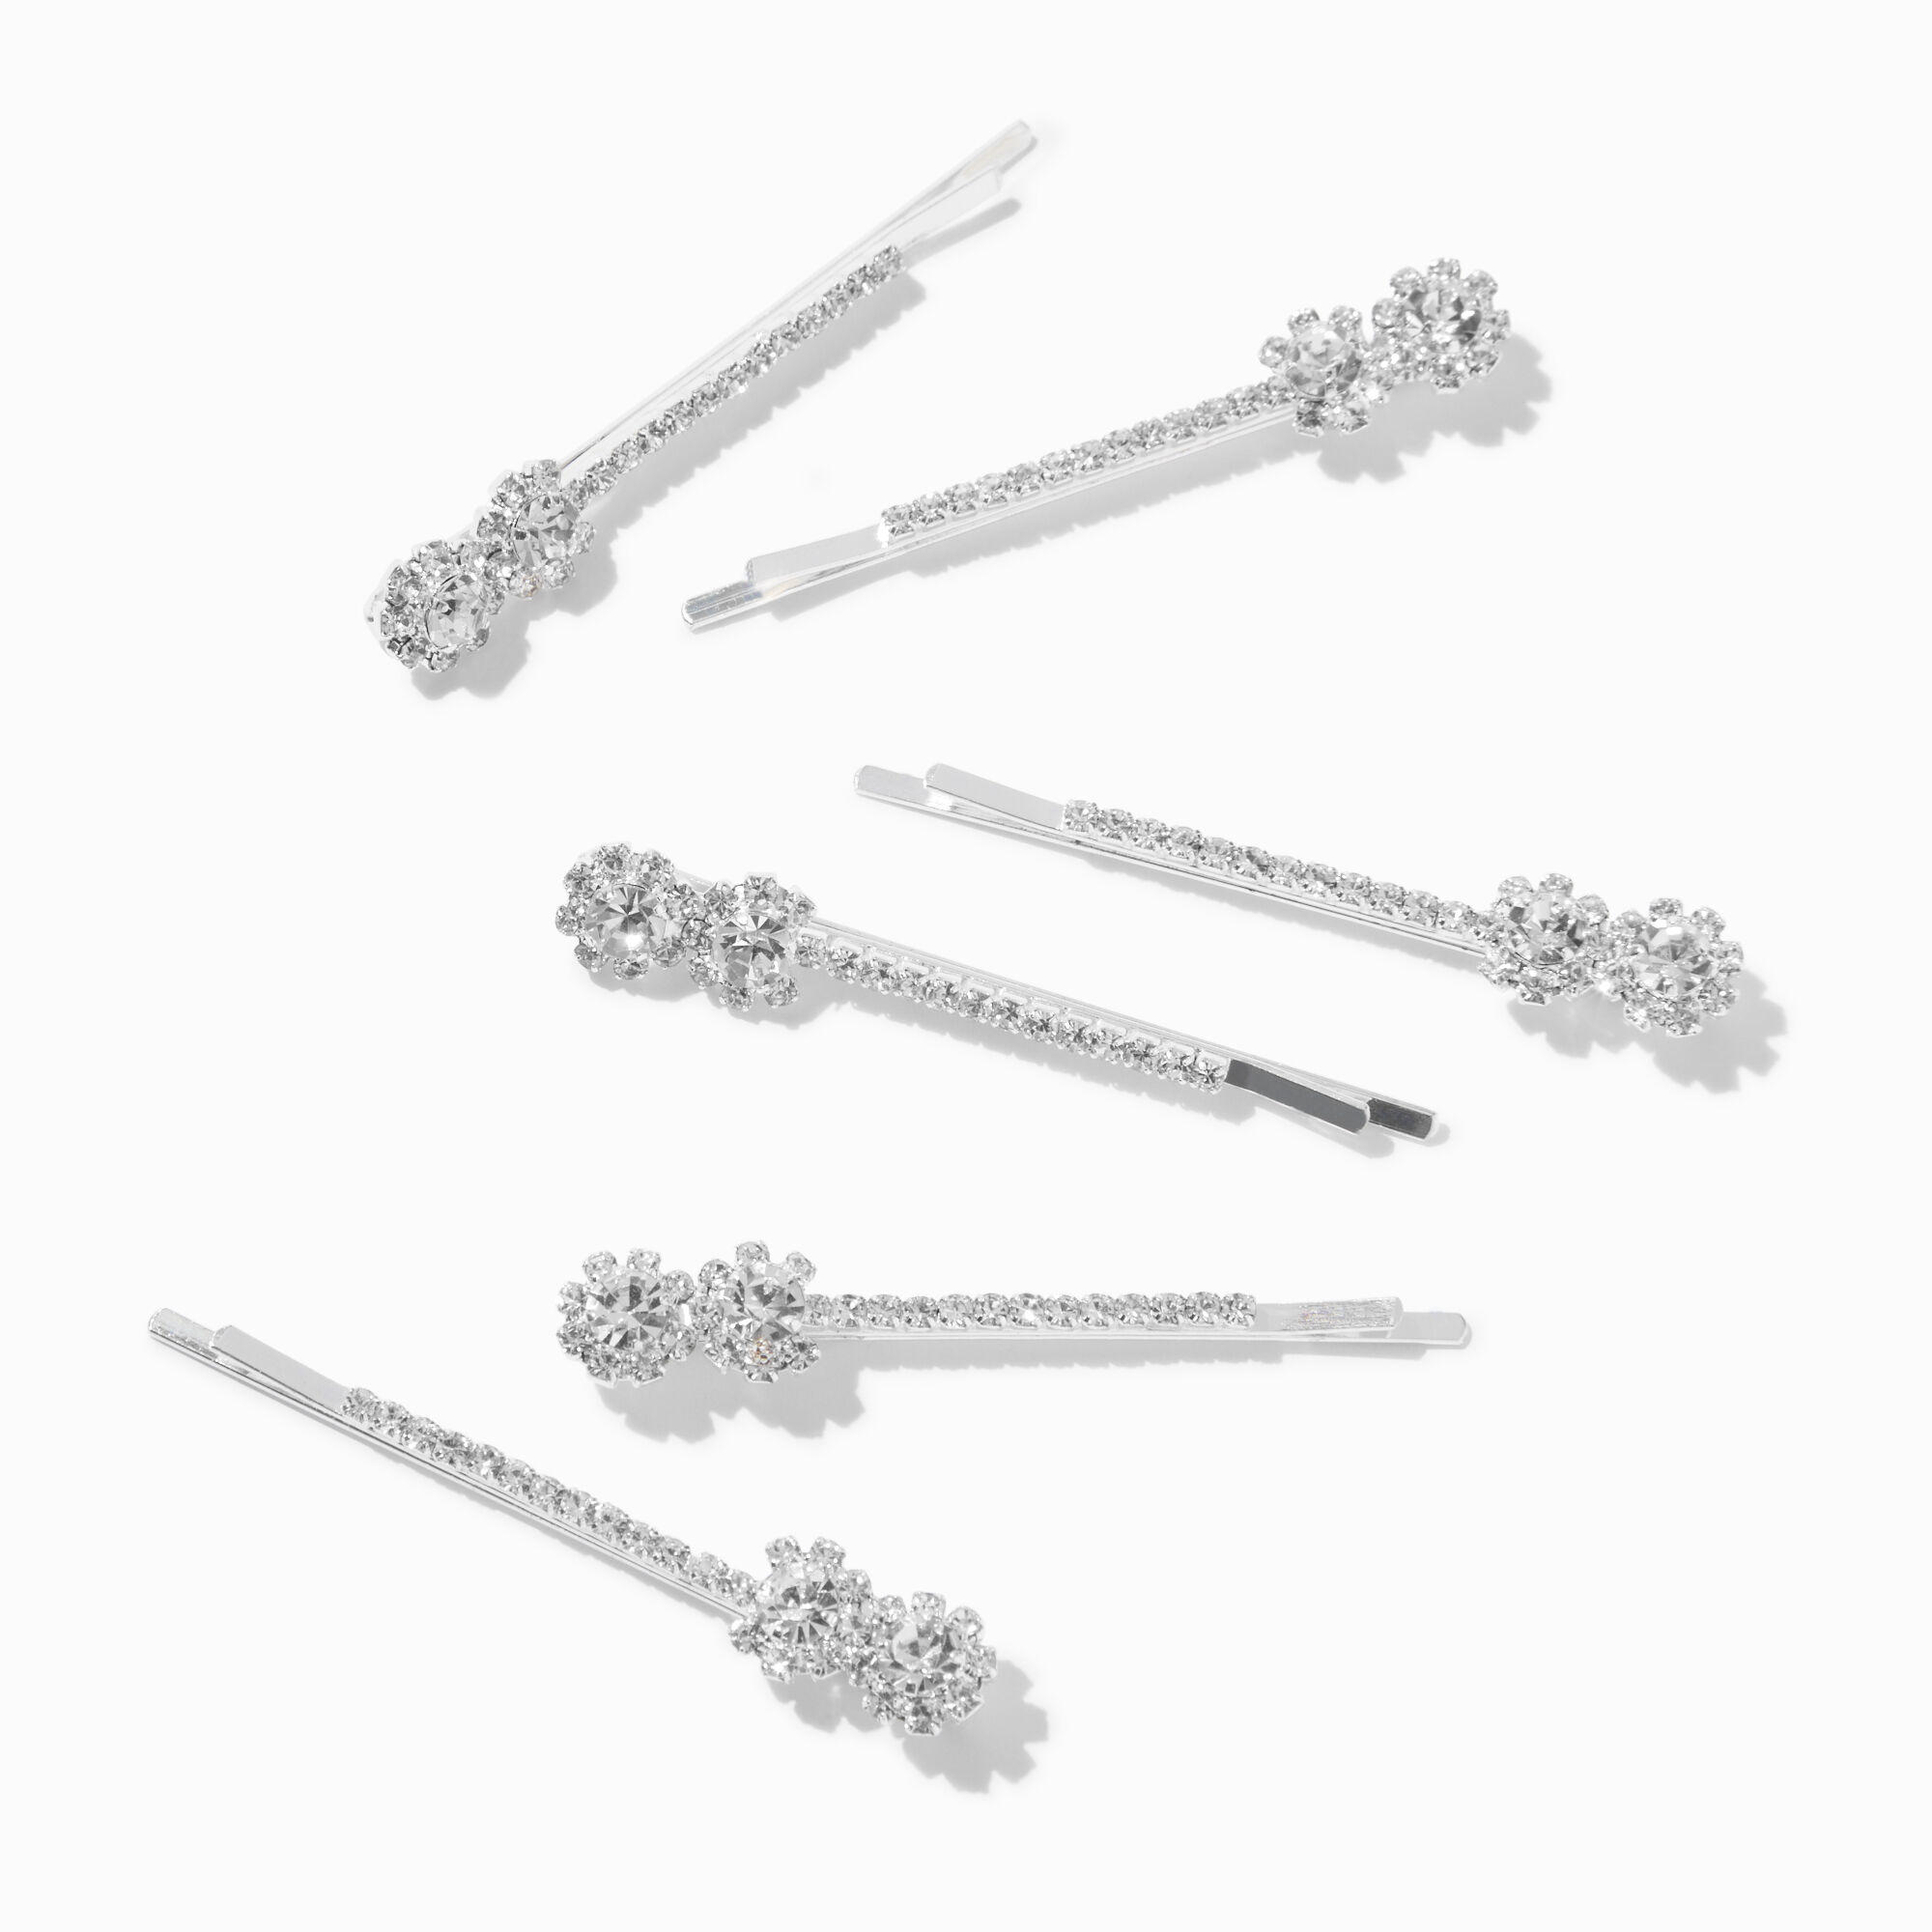 View Claires Tone Halo Crystal Bobby Pins 6 Pack Silver information